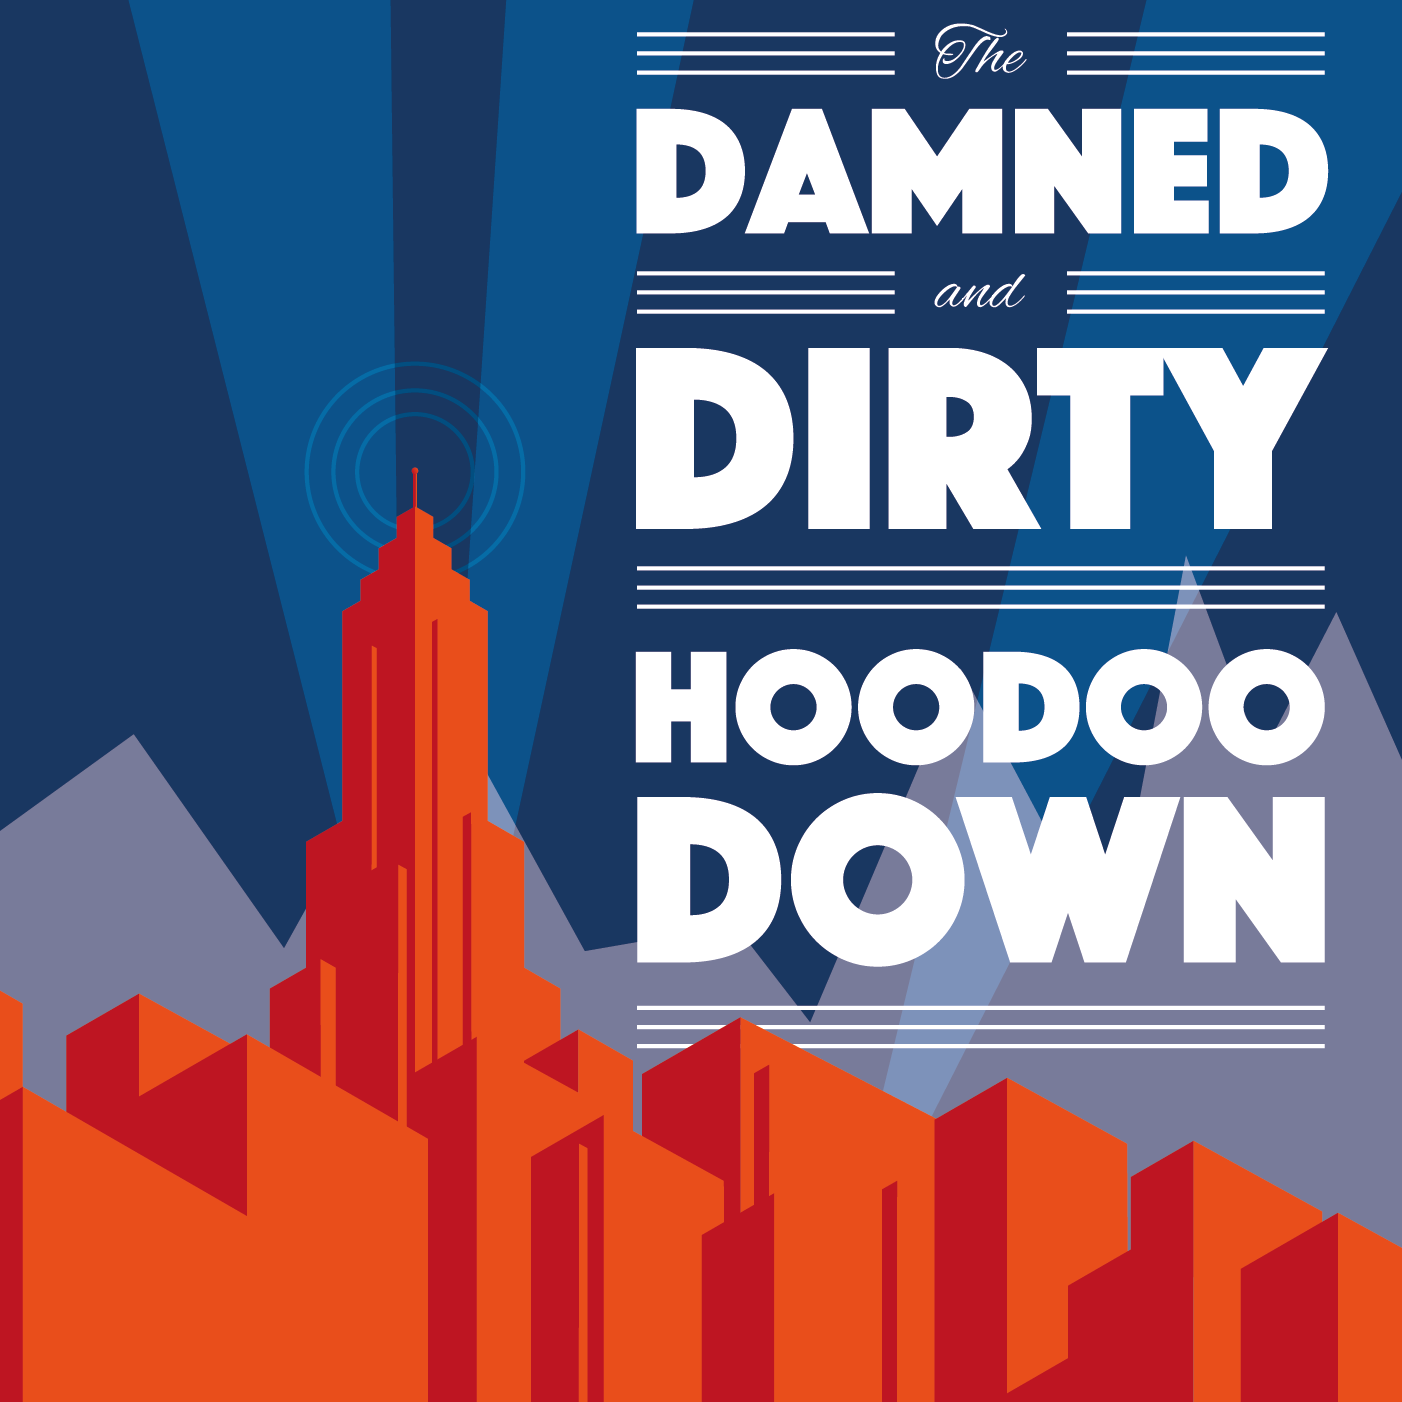  The Damned And Dirty – Hoodoo Down